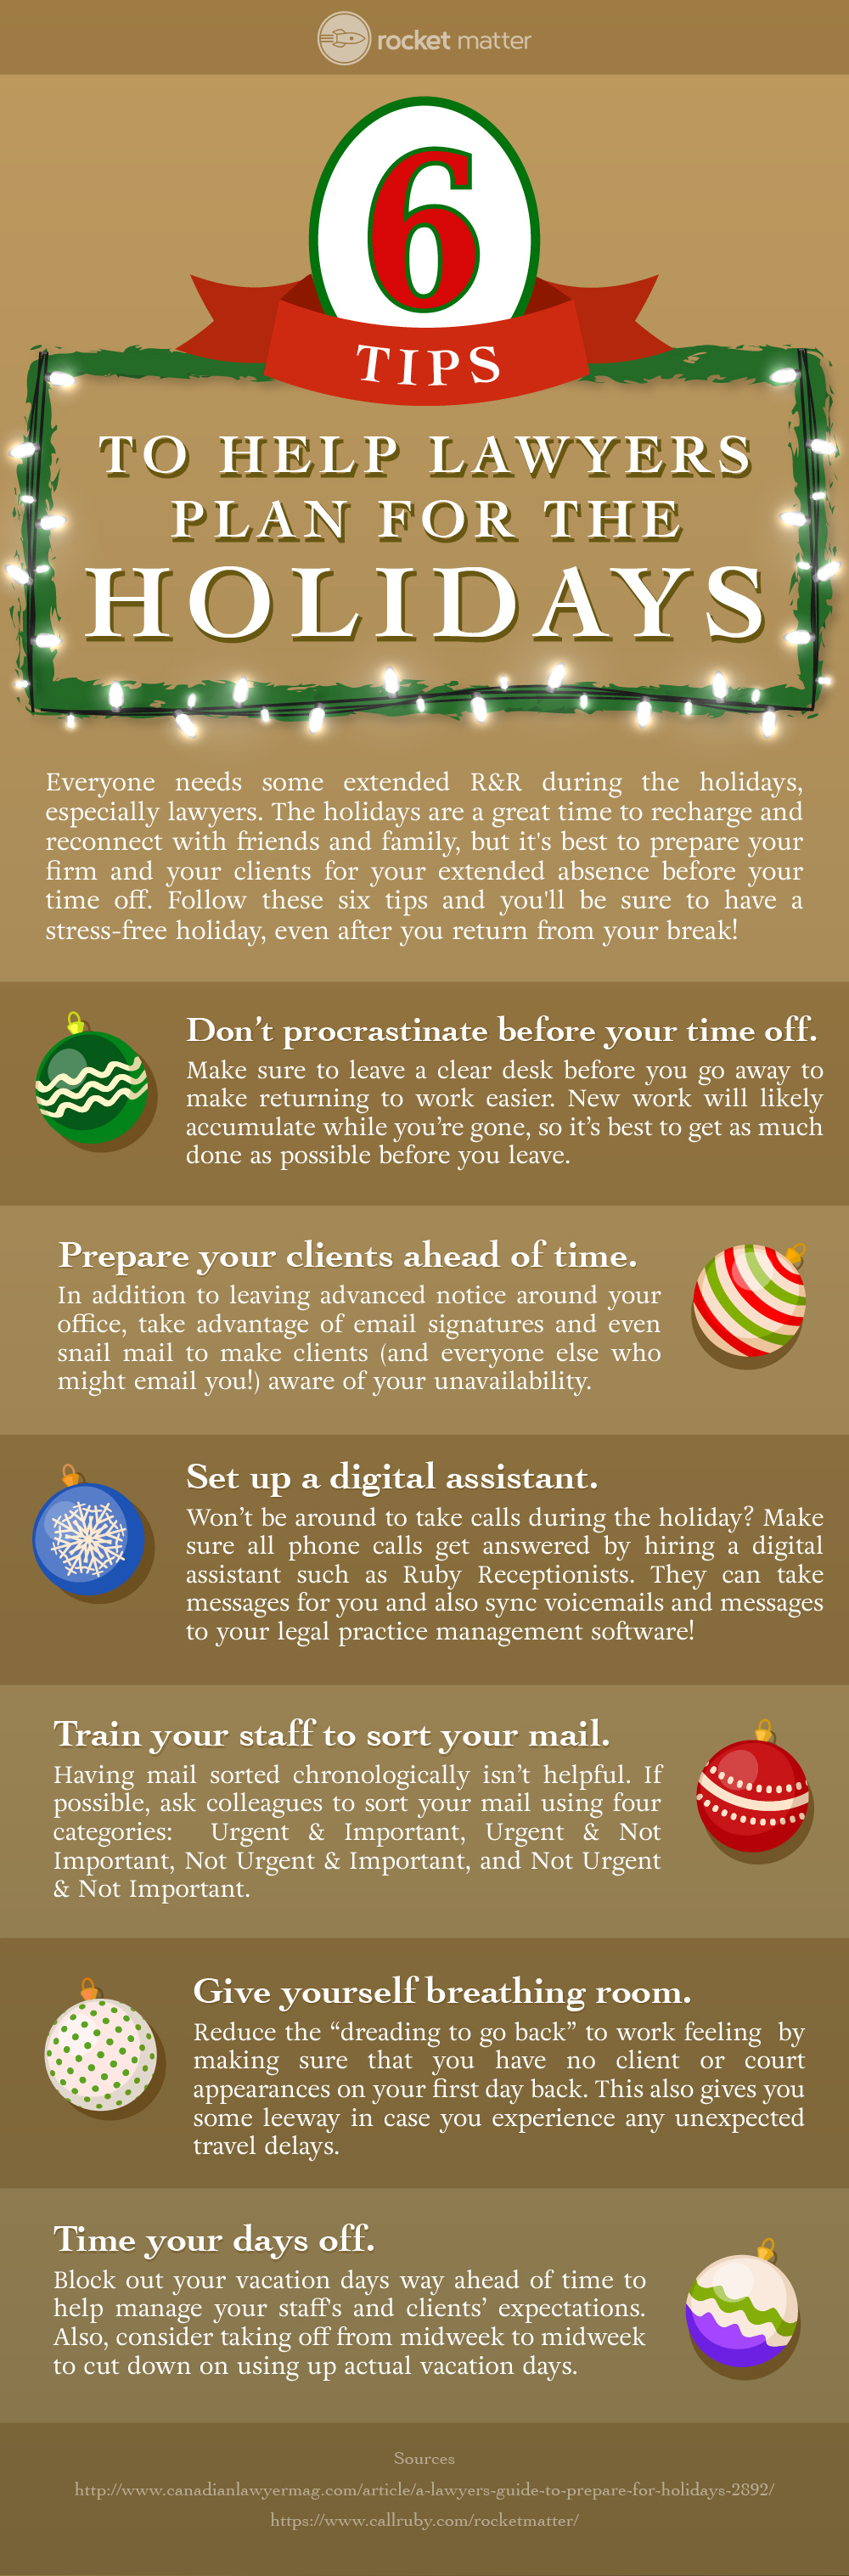 6 Tips to Help Lawyers Plan for the Holidays (Infographic)